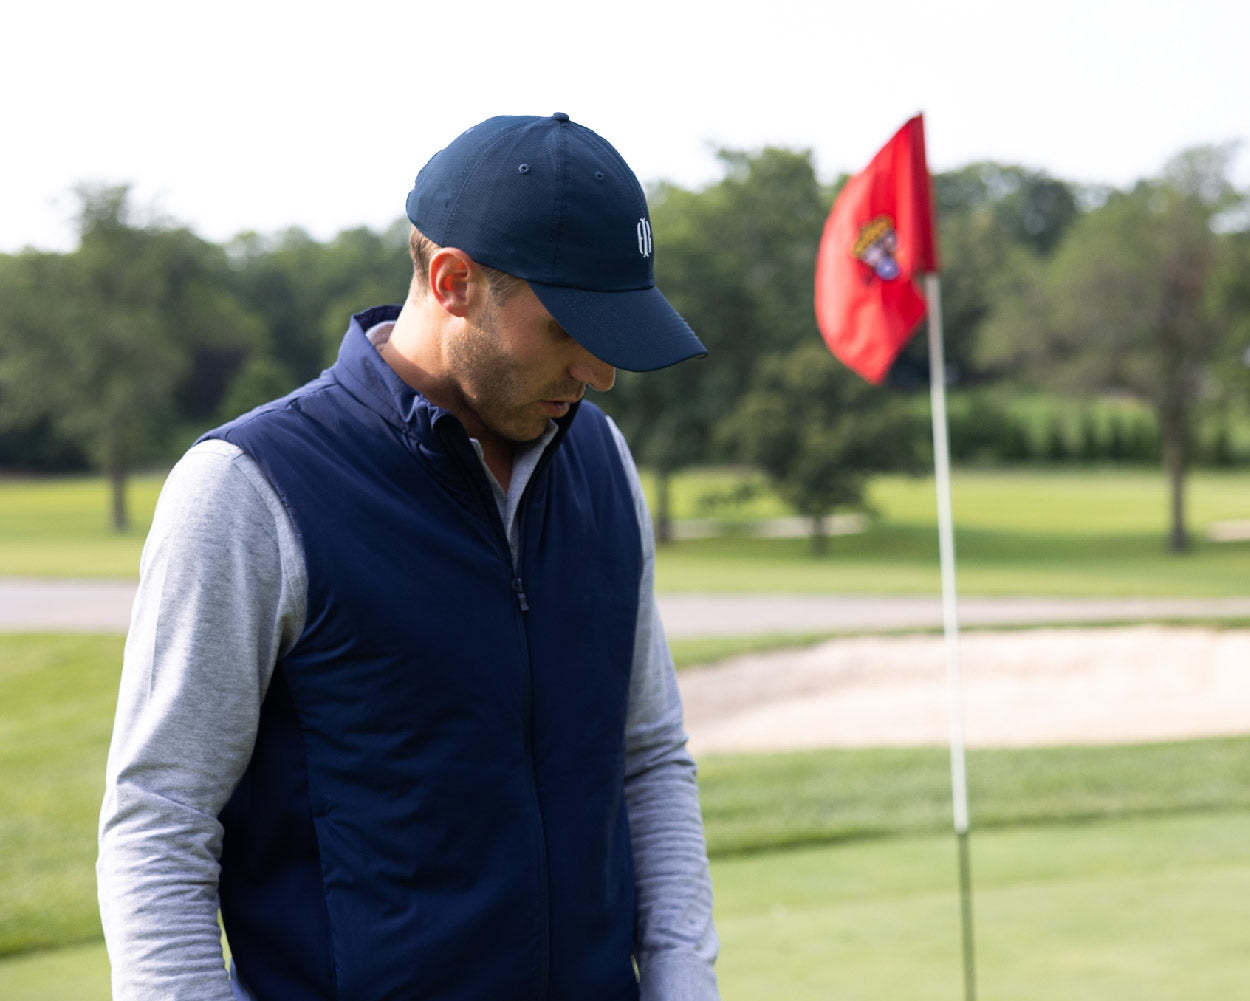 Man wearing navy hat and vest golf over a gray sweater on golf course with red flag in background.